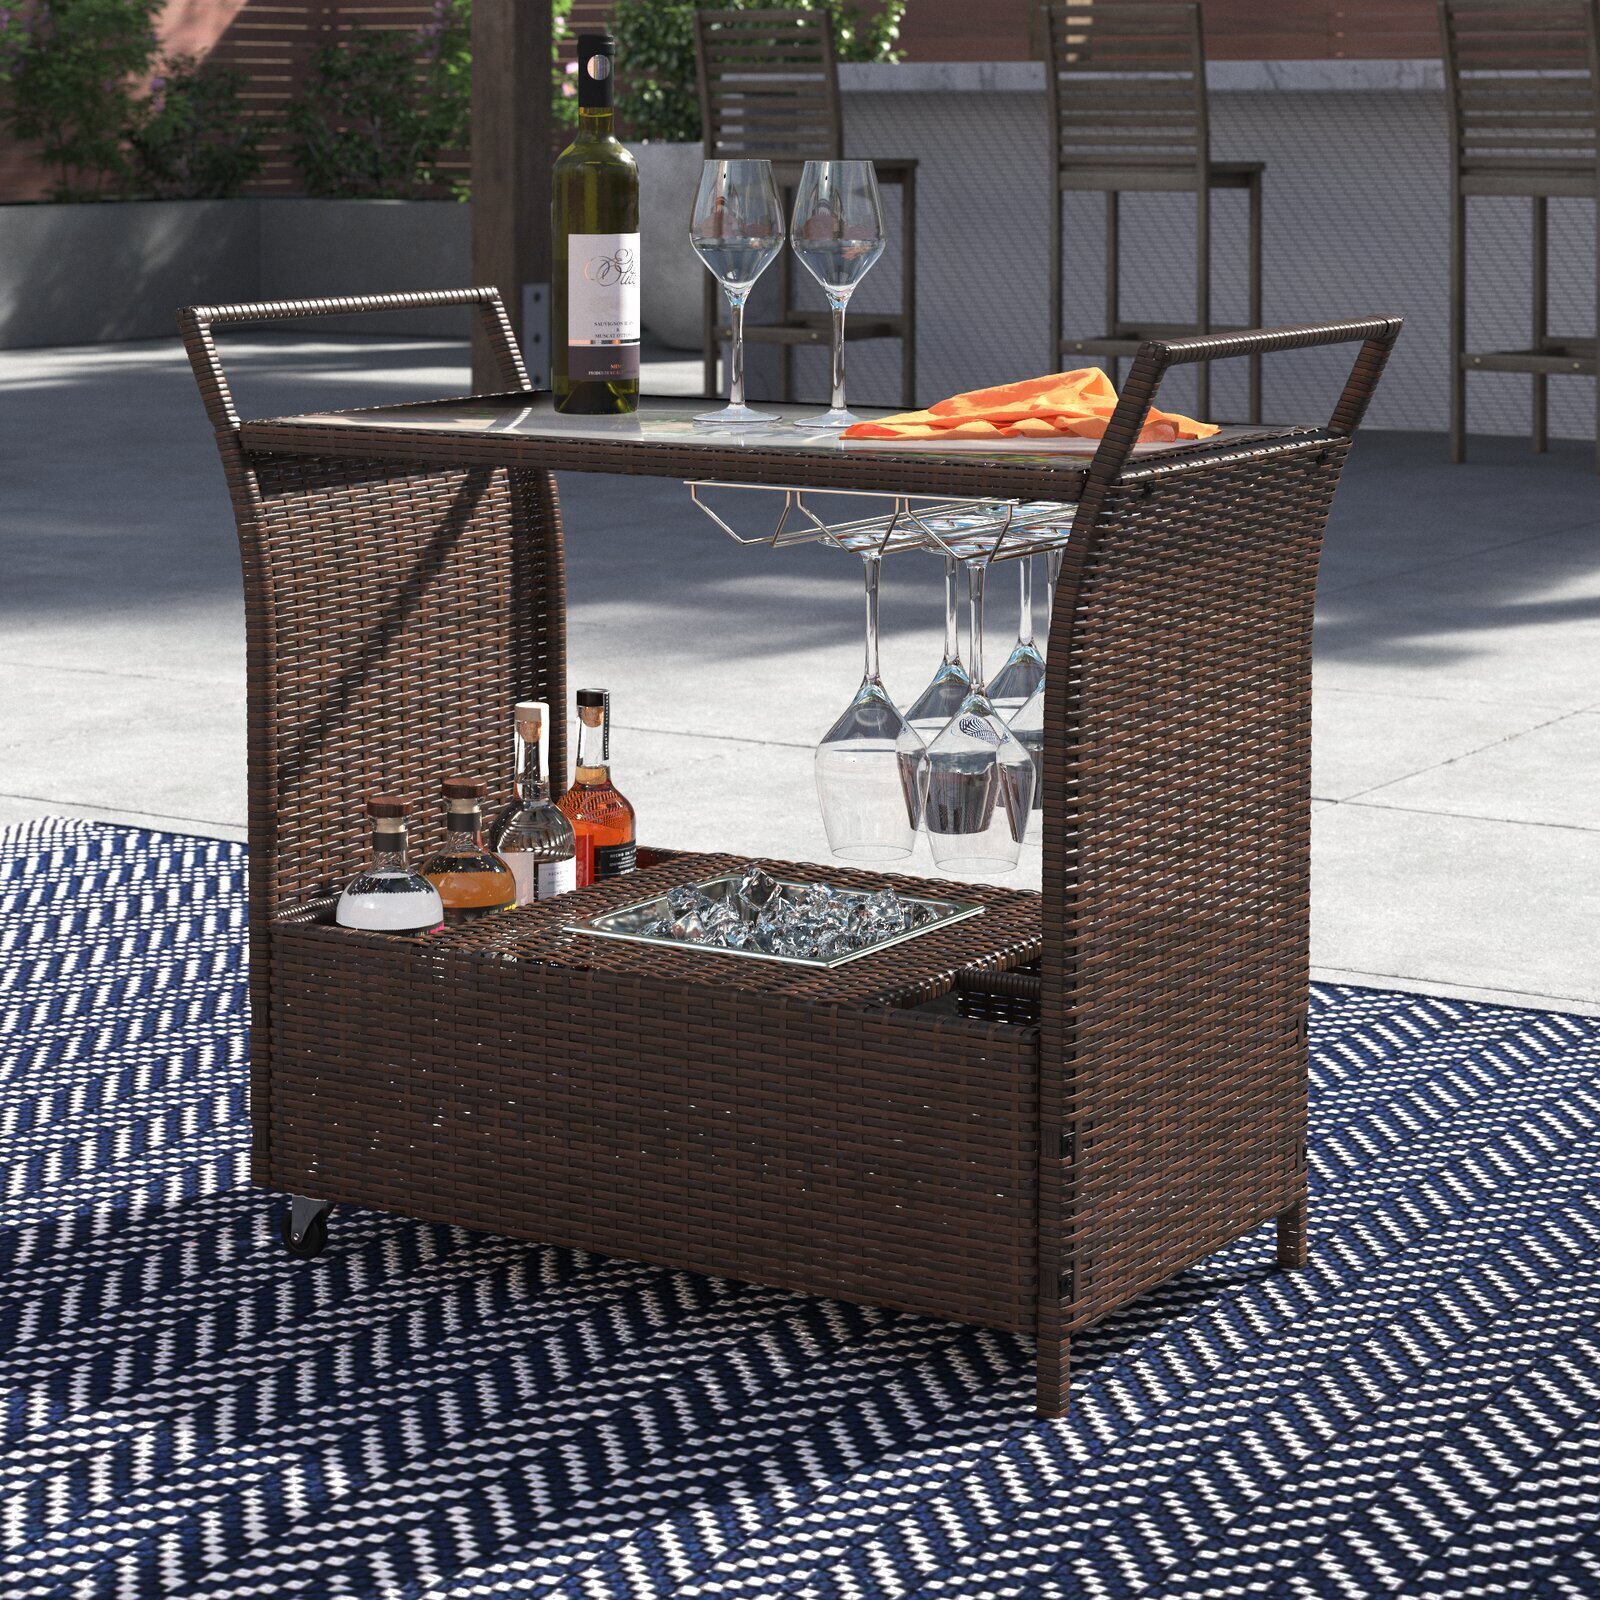 Outdoor Patio Bars For Sale   Ideas on Foter